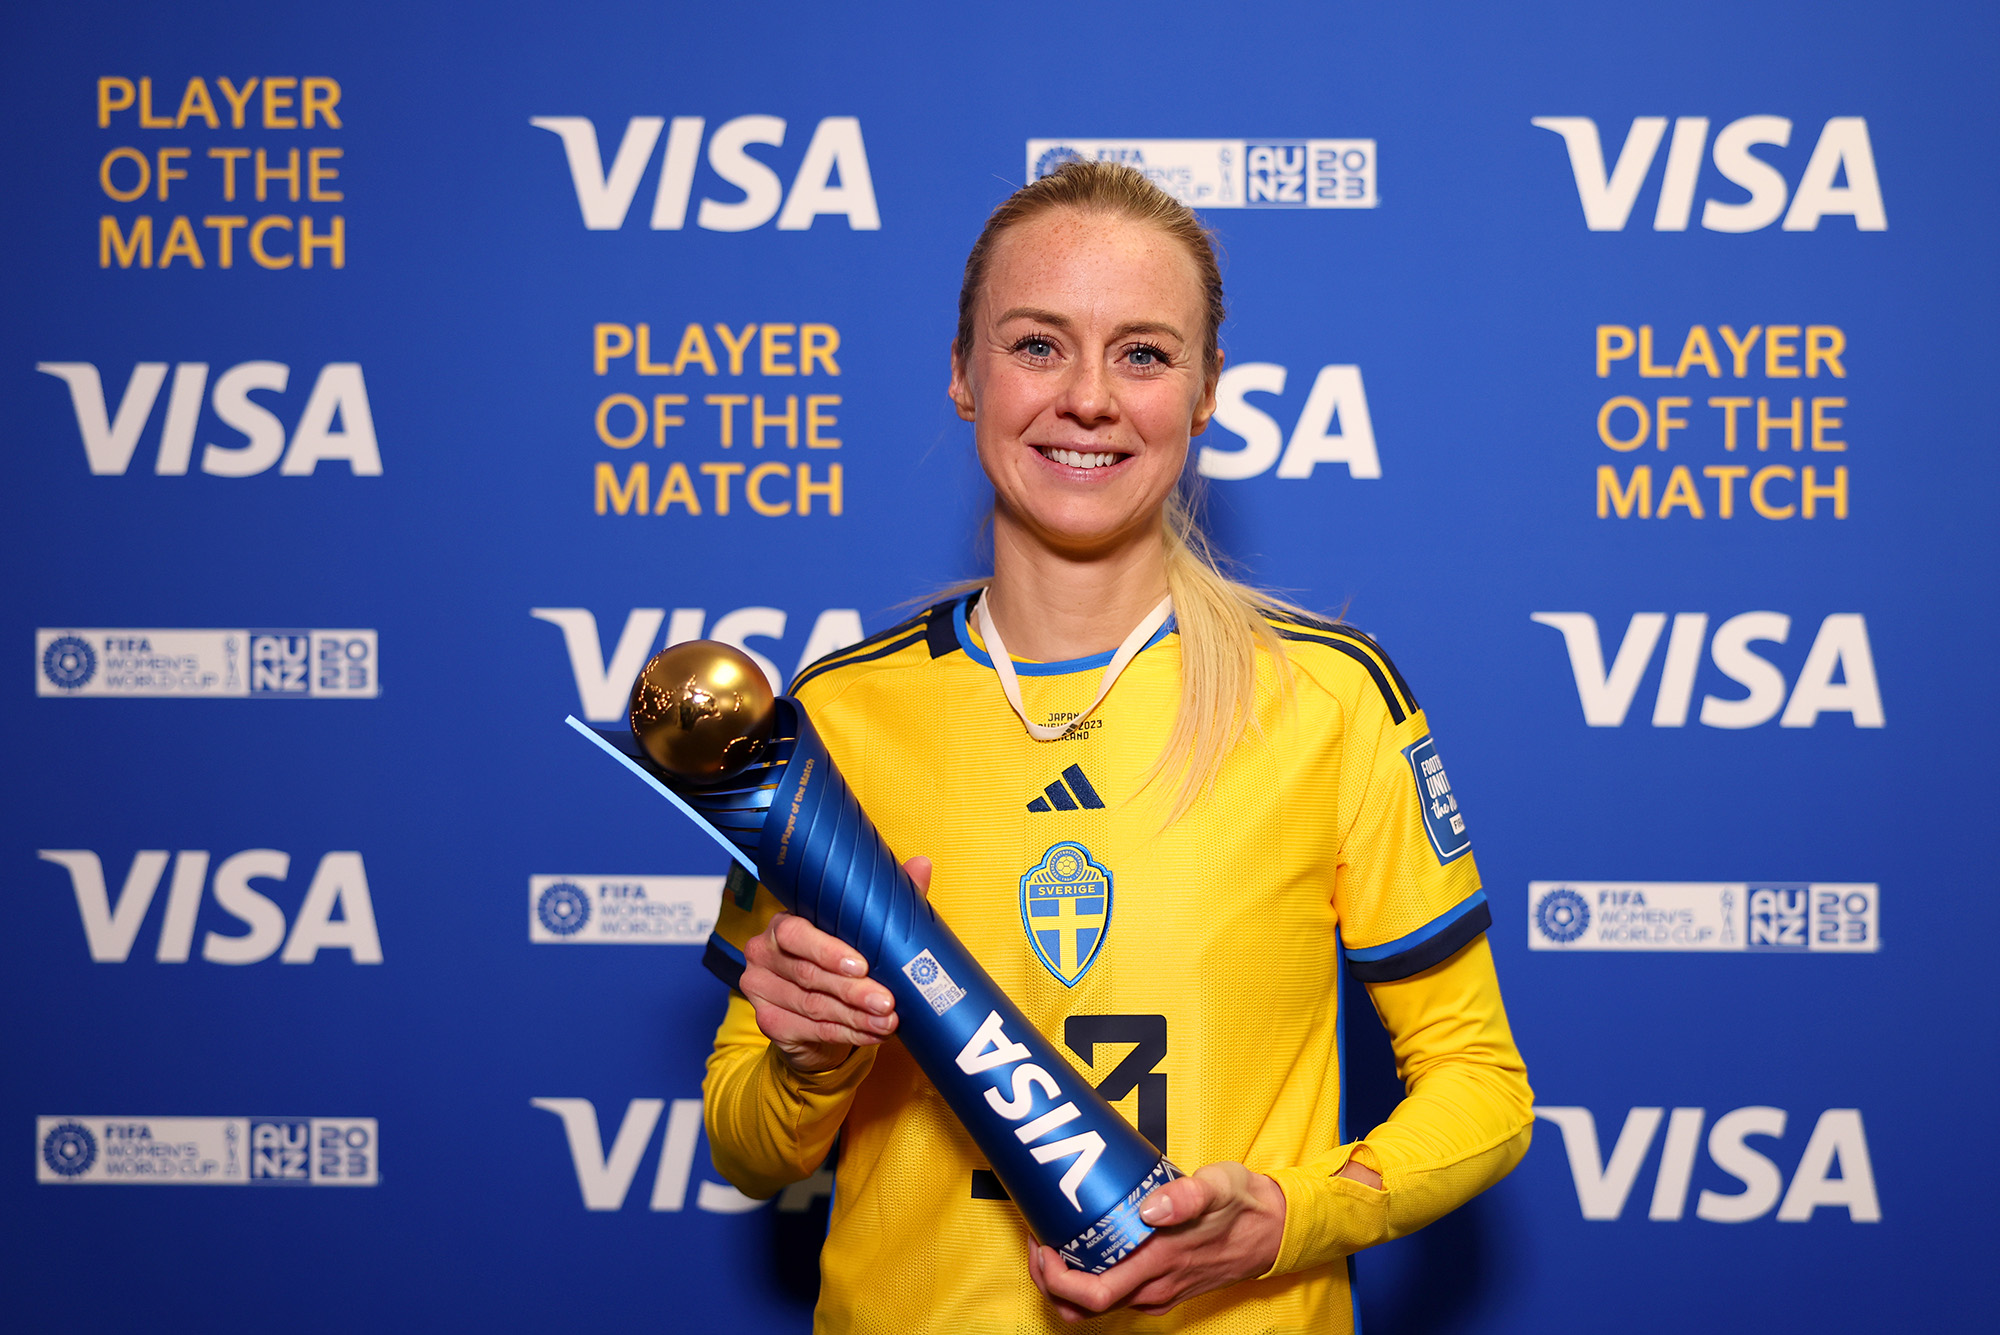 Sweden defender Amanda Ilestedt was Player of the Match in the quarterfinal between Japan and Sweden at Eden Park on August 11.